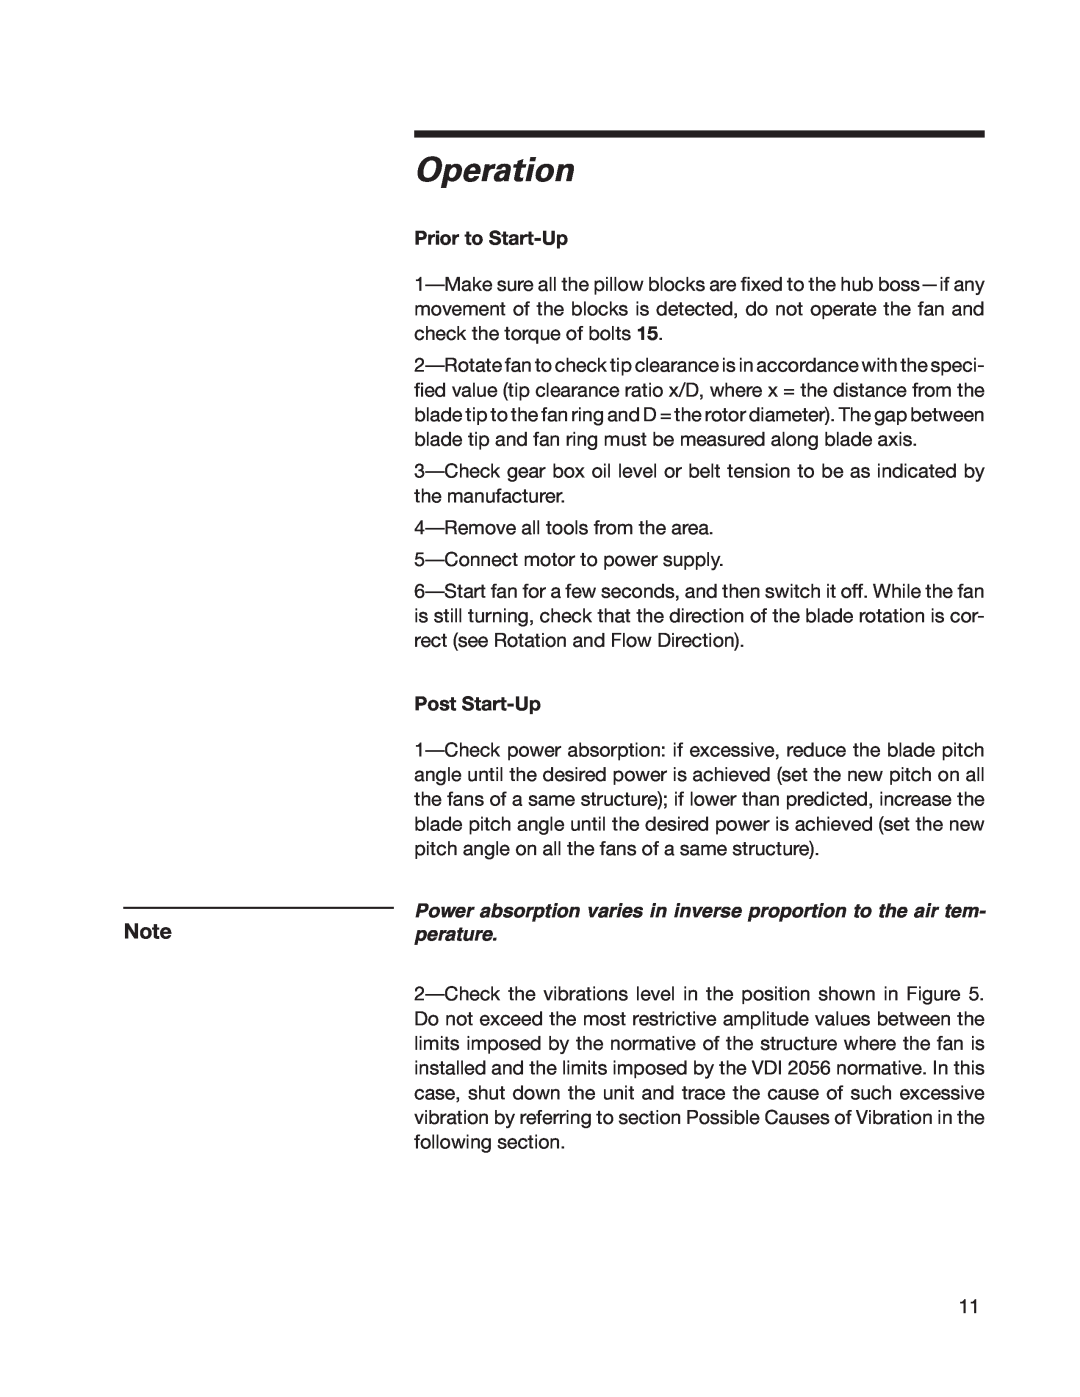 SPX Cooling Technologies 07-1126 user manual Operation, Prior to Start-Up, Post Start-Up 